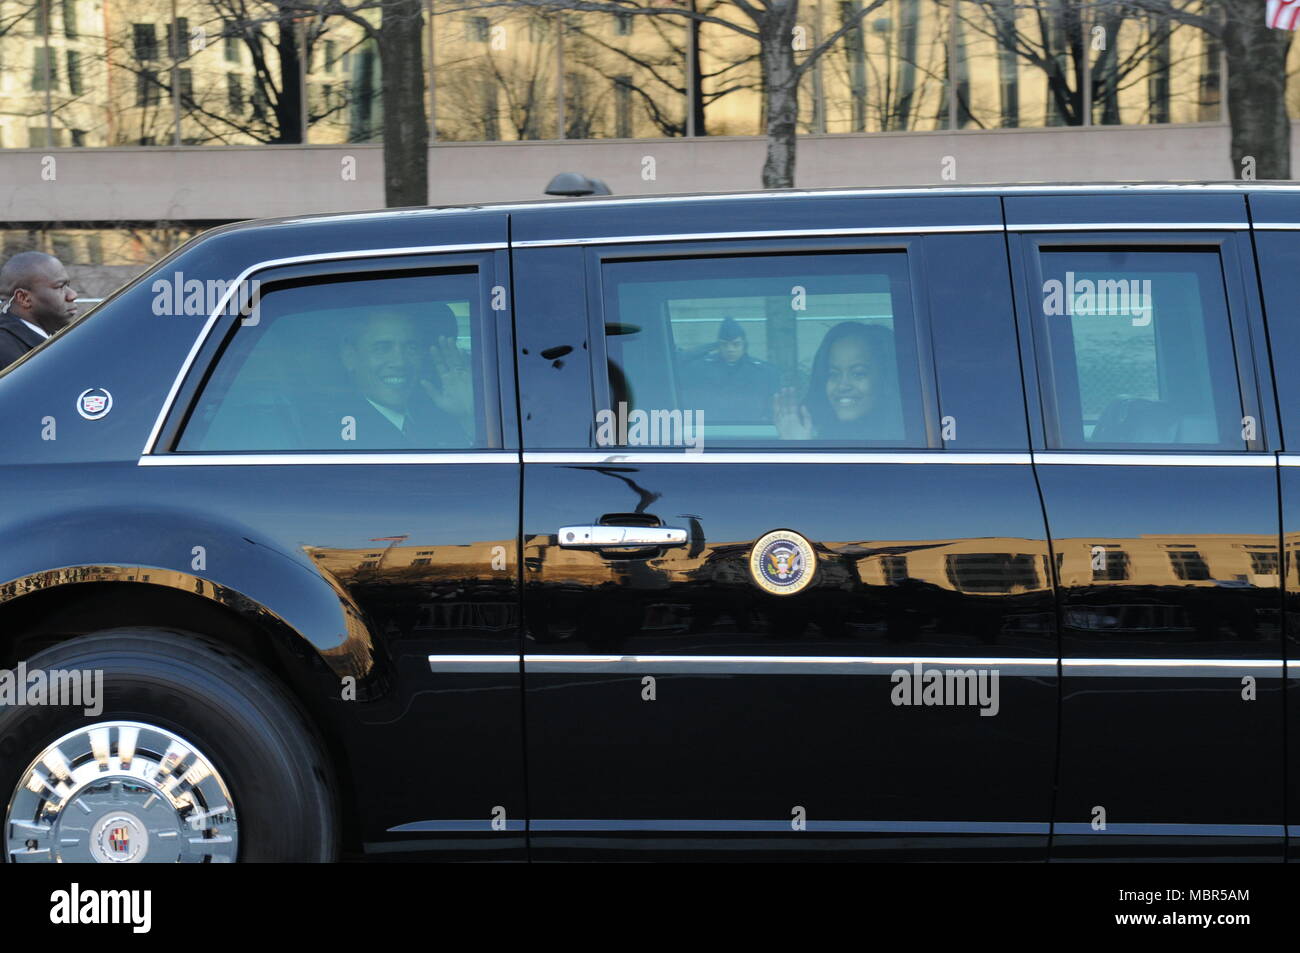 President Barack Obama and his daughter, Sasha, wave to the crowd from inside the presidential limousine as it makes its way down Pennsylvania Avenue for the 2009 presidential inaugural parade in Washington, D.C., Jan. 20, 2009. DoD photo by Mass Communication Specialist 1st Class Mark O'Donald, U.S. Navy Stock Photo